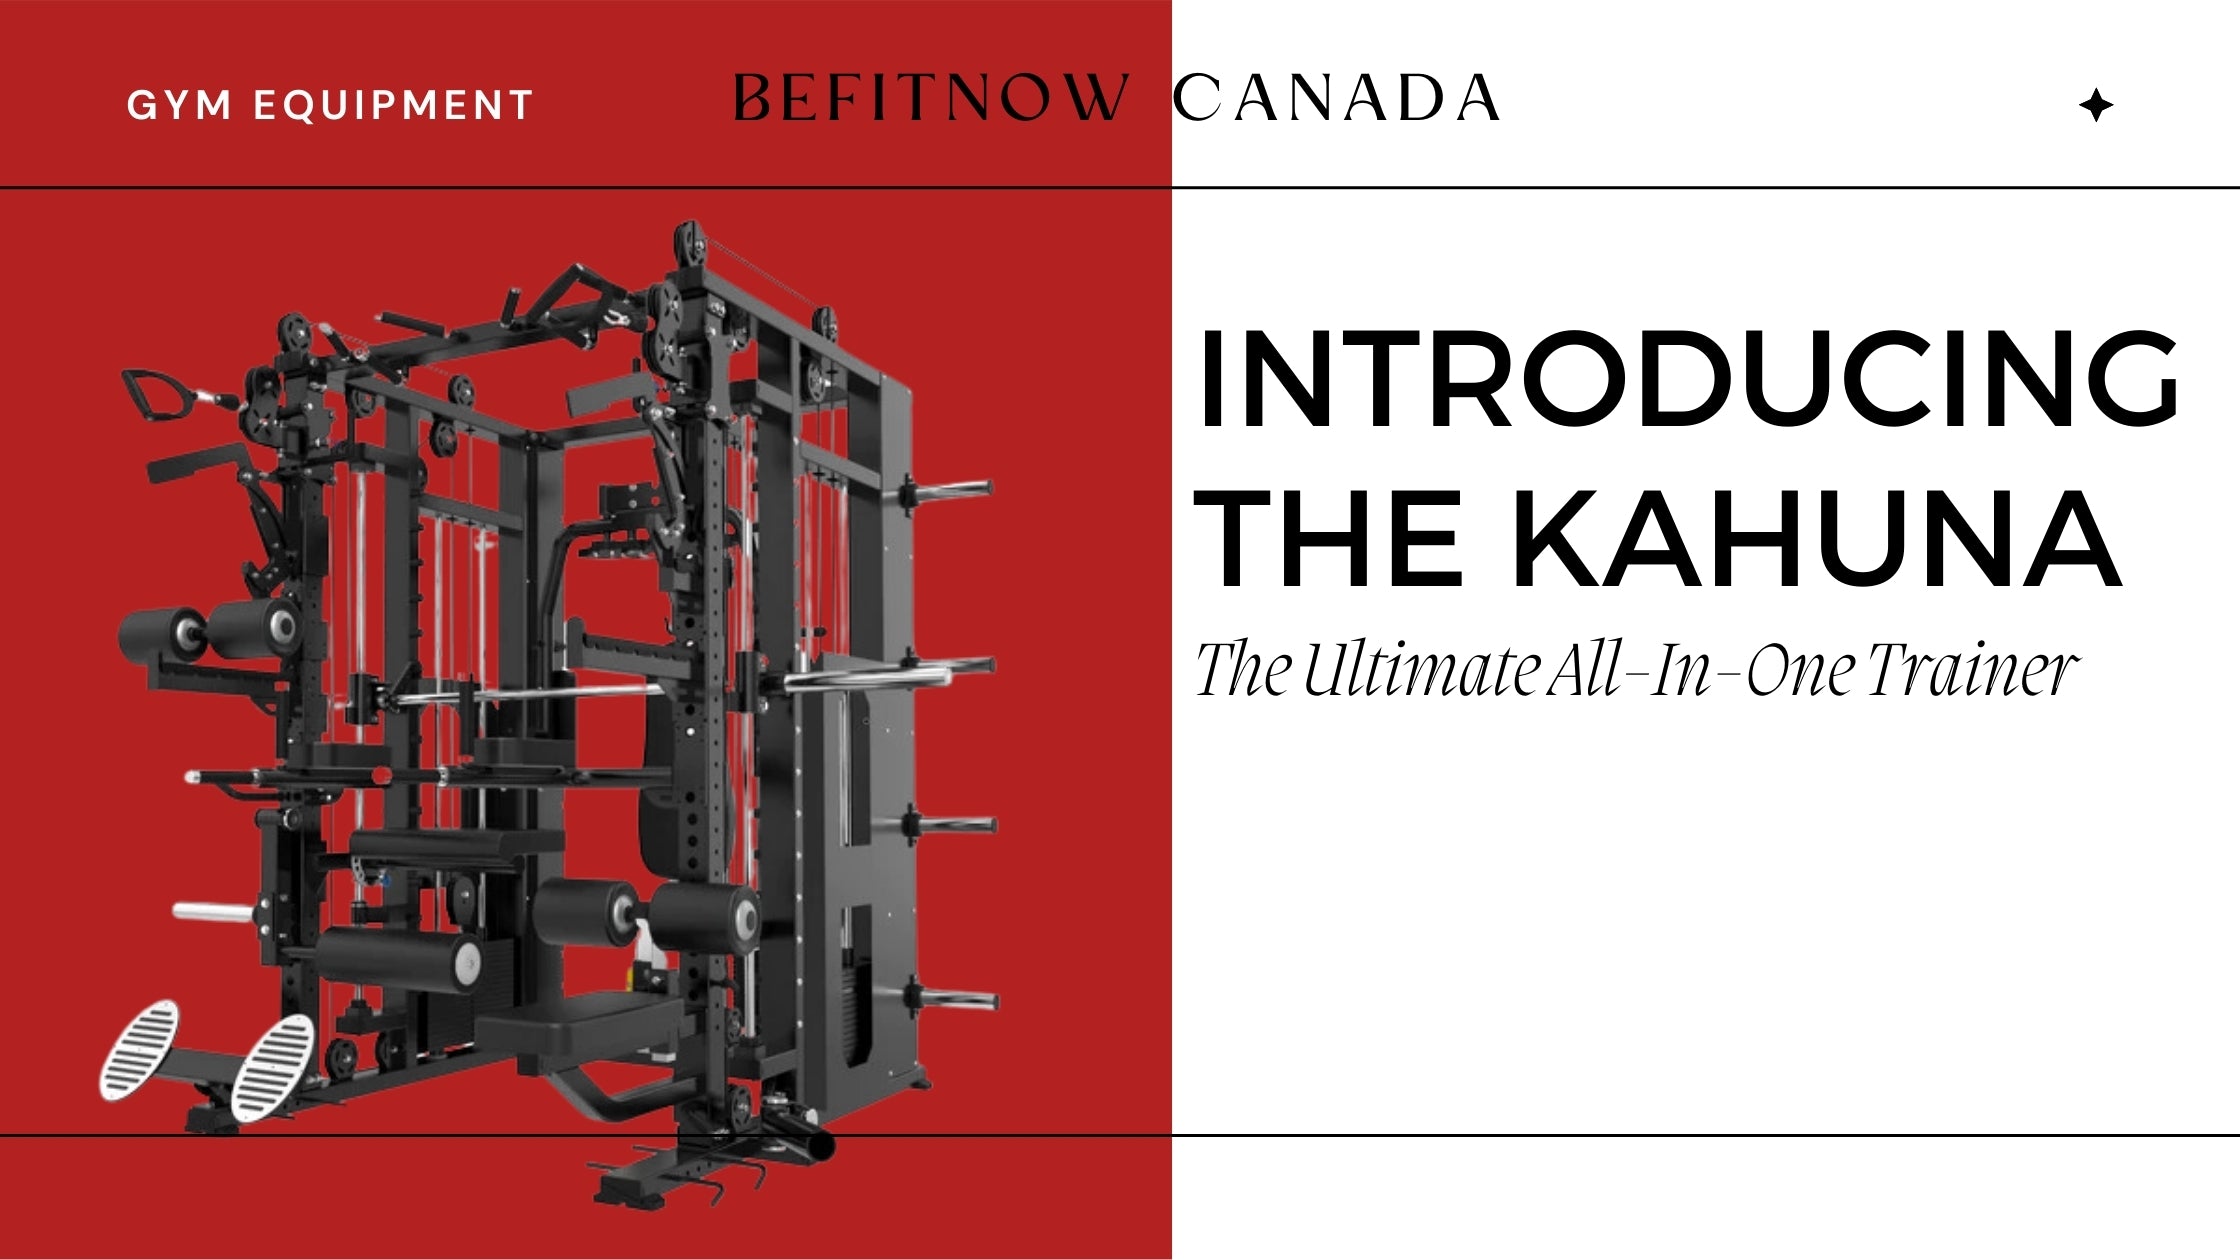 Introducing The Kahuna: The Ultimate All-In-One Strength Machine Trainer for Home Gym Setup